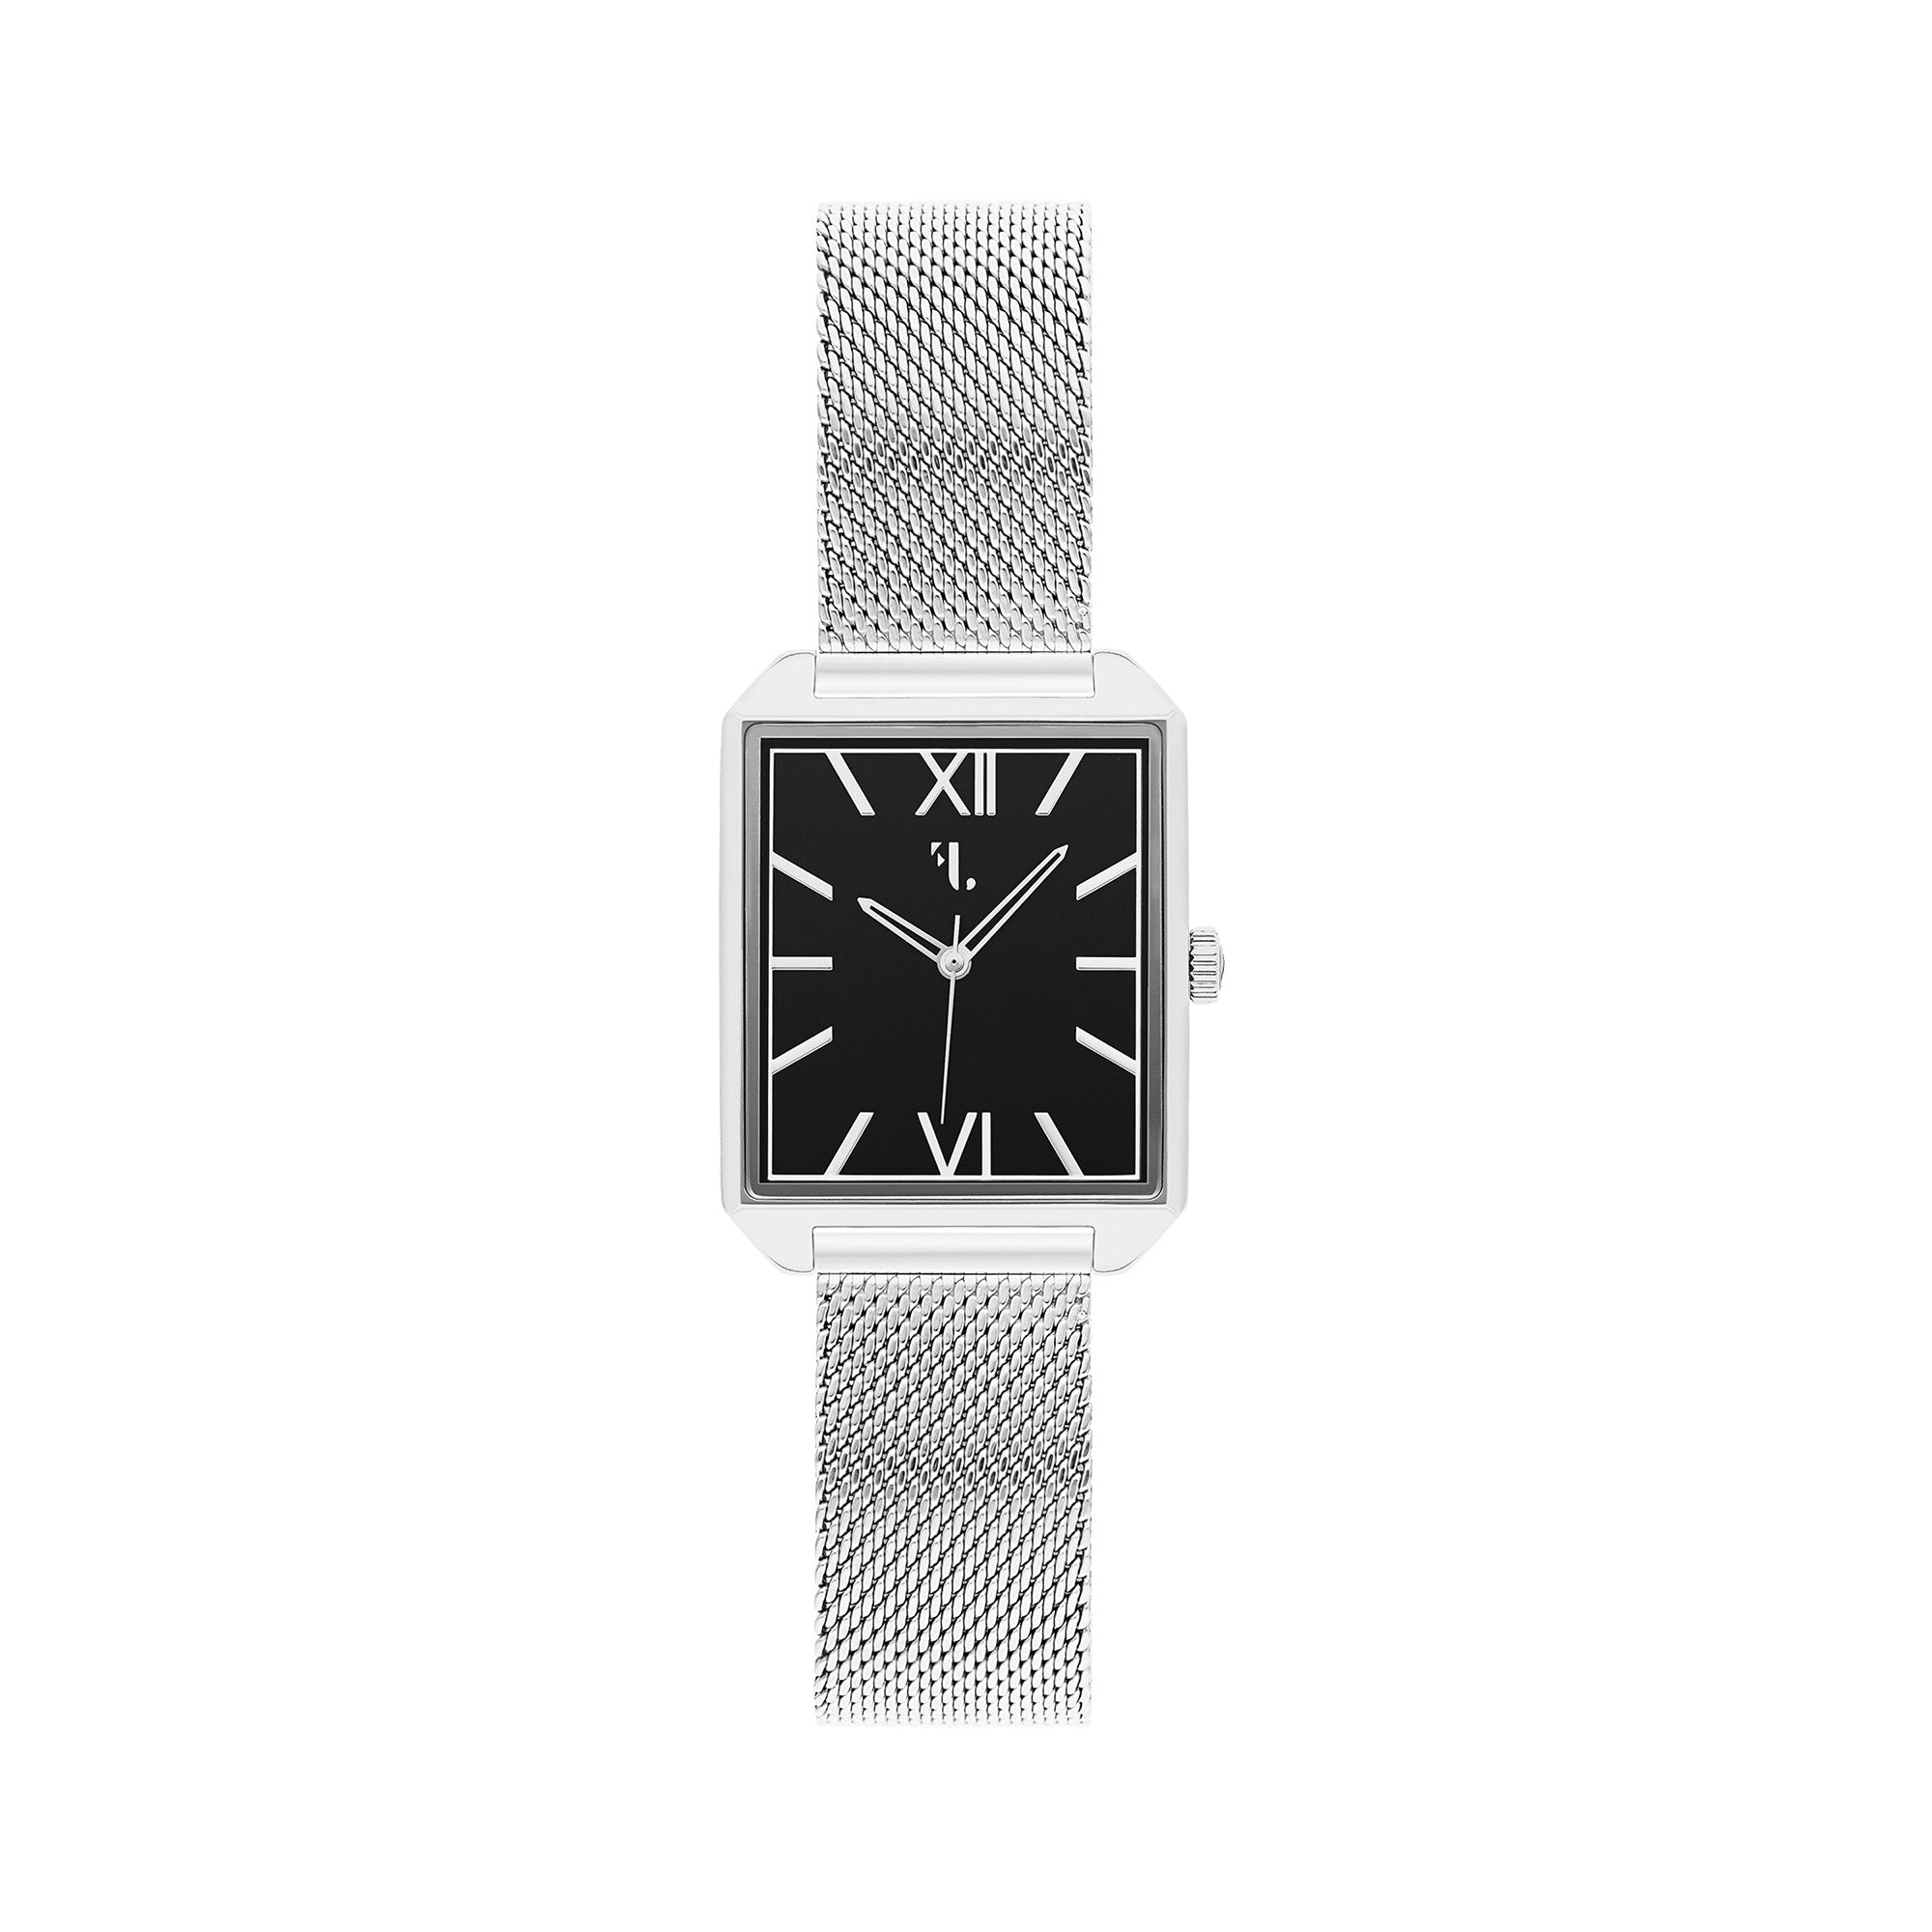 Uccle watch with mesh band from Five Jwlry. It is made of a square silver case and a black dial. It is the ideal watch for a man, with its three hands, its quartz mechanism, its water resistance and its 2 year warranty.